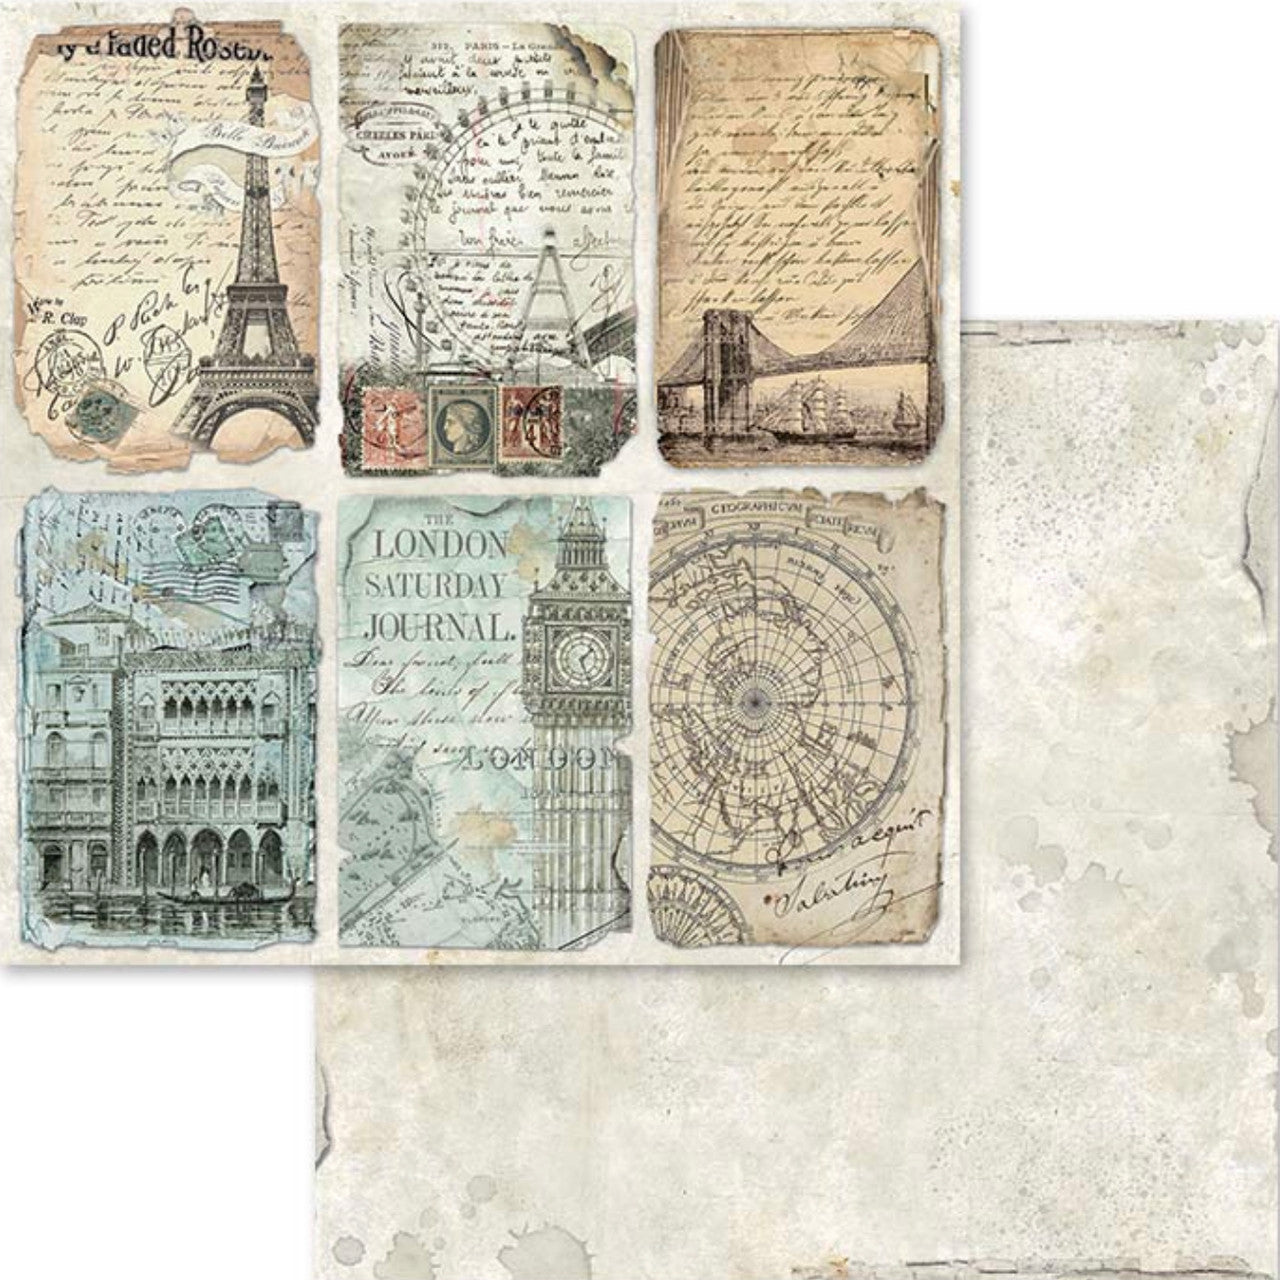 Stamperia Around the World Paper Collection 12” x 12”